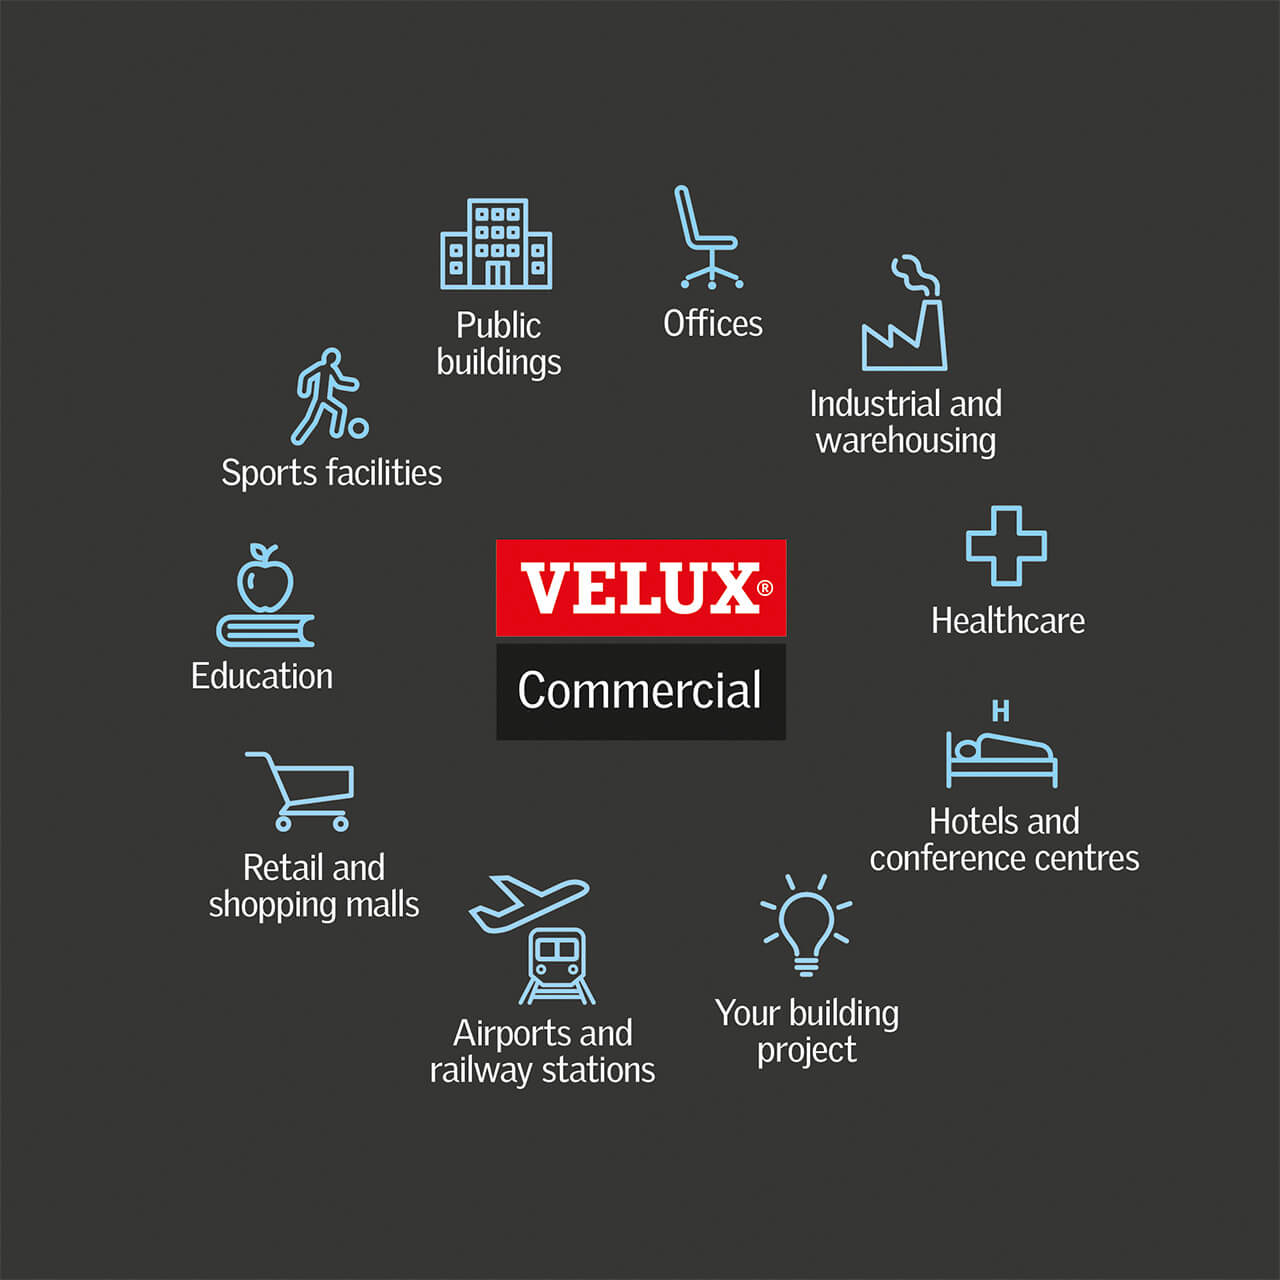 VELUX Commercial - Rooflights for any type of commercial, industrial and public buildings